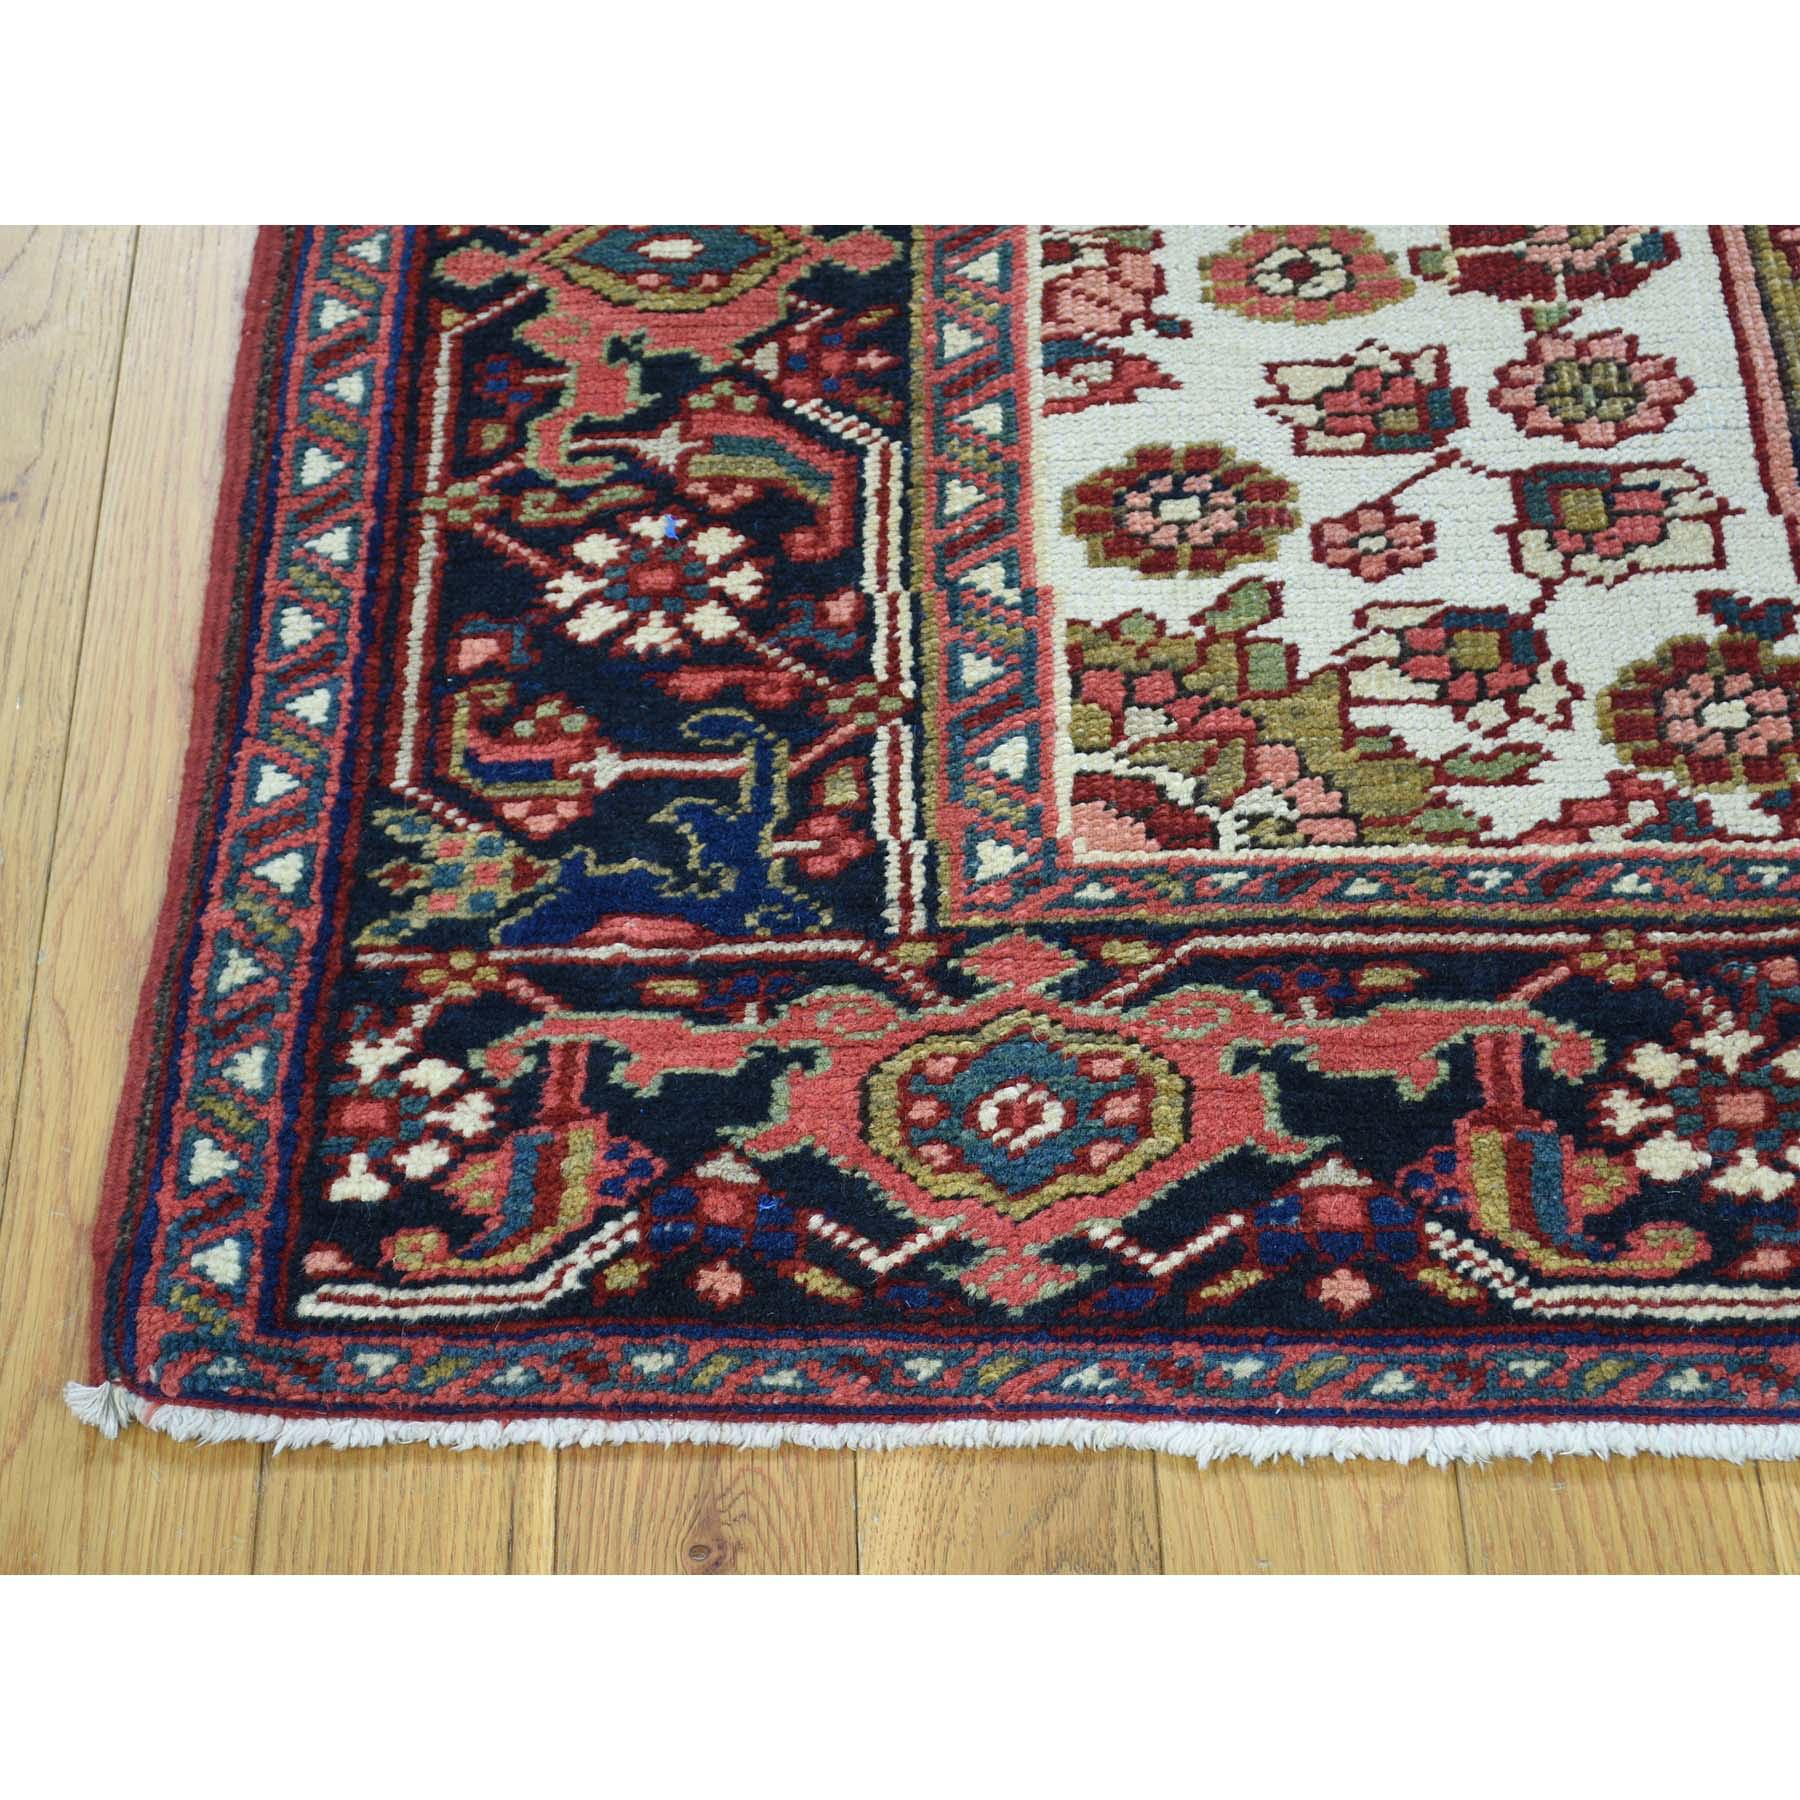 This is a truly genuine one-of-a-kind hand knotted antique Persian Heriz mint condition Oriental rug. It has been Knotted for months and months in the centuries-old Persian weaving craftsmanship techniques by expert artisans. Measures: 4'6